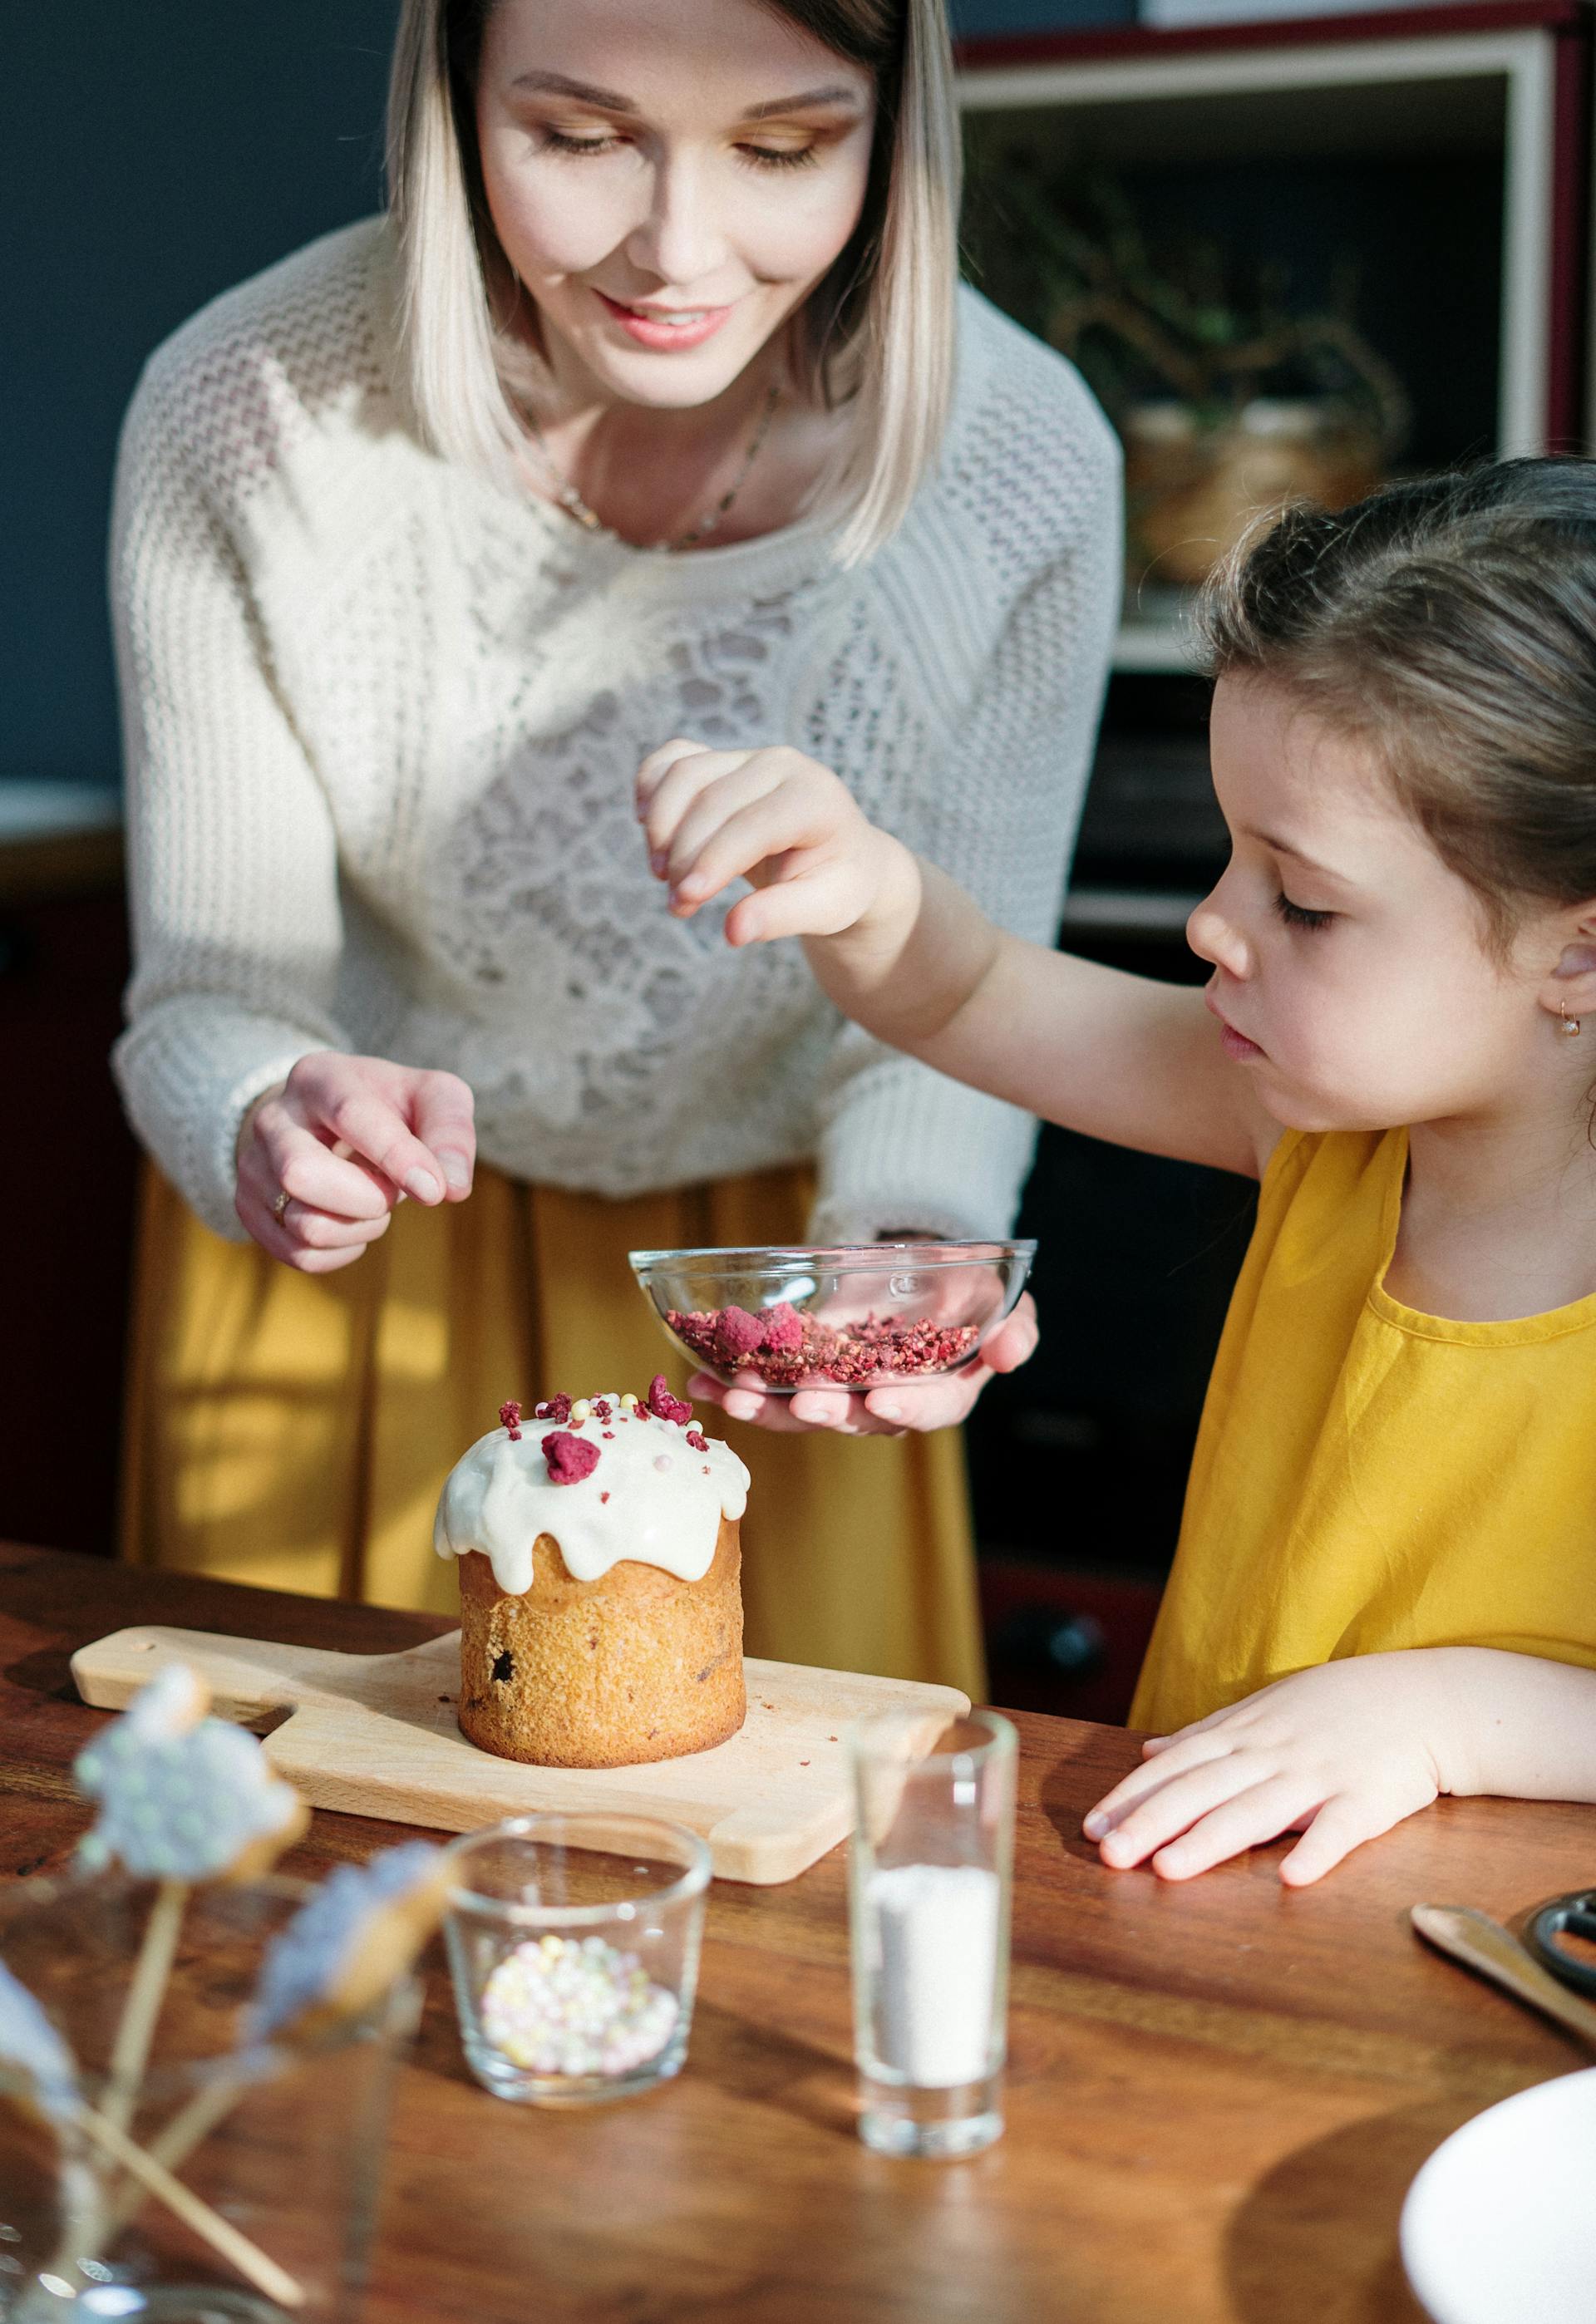 A woman and little girl decorating a cake | Source: Pexels